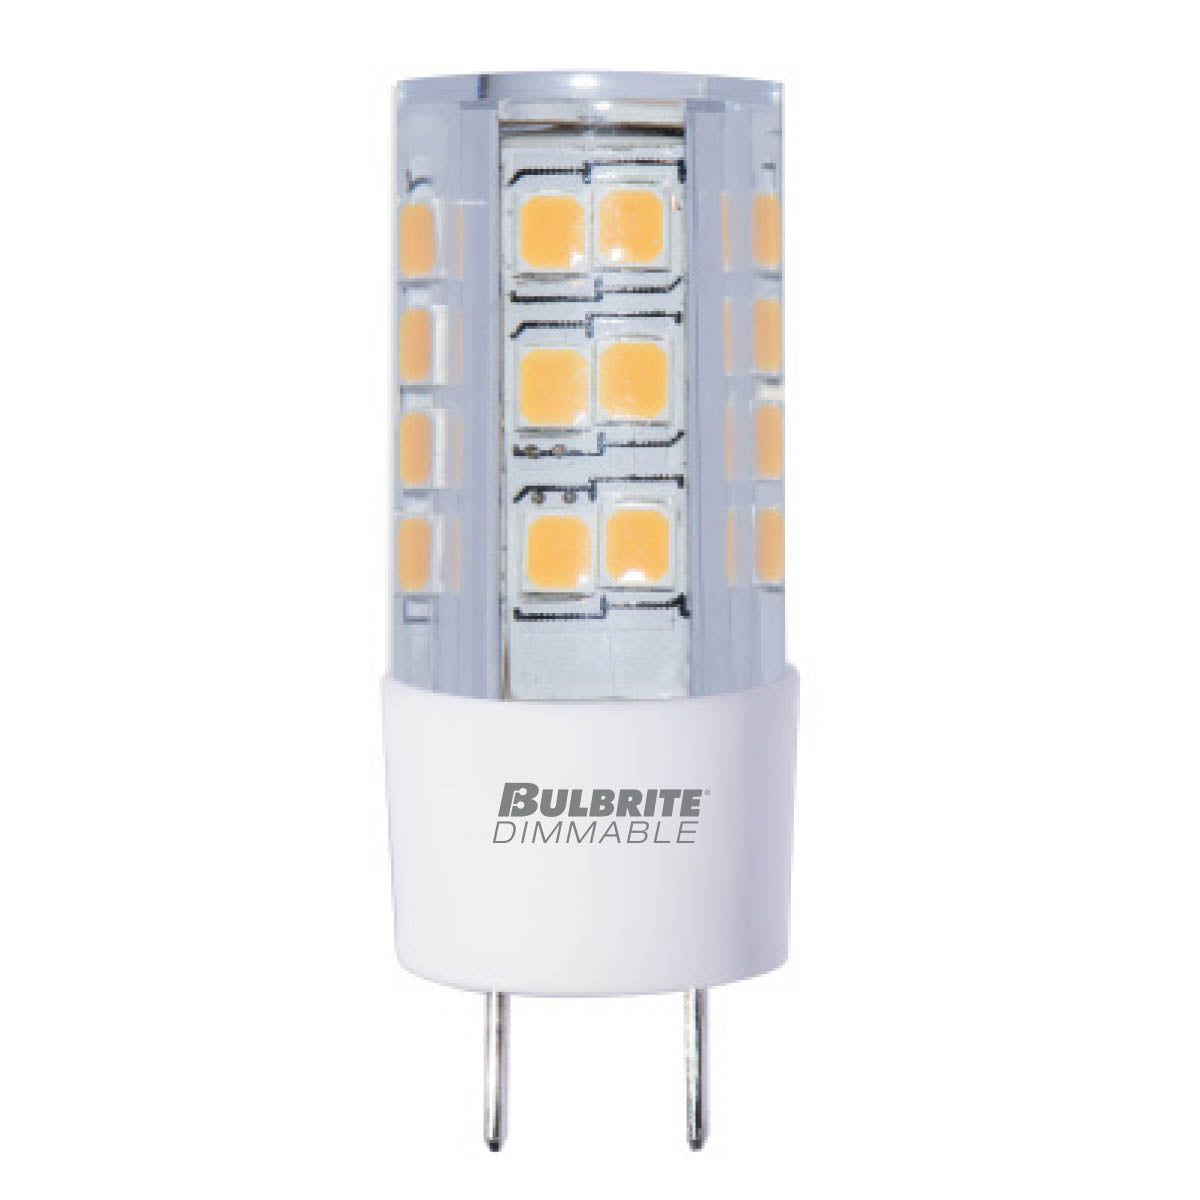 Bulbrite 770588 LED4GY8/27K/120/D 4.5W LED GY8 CLEAR 2700K 120V DIMMABLE